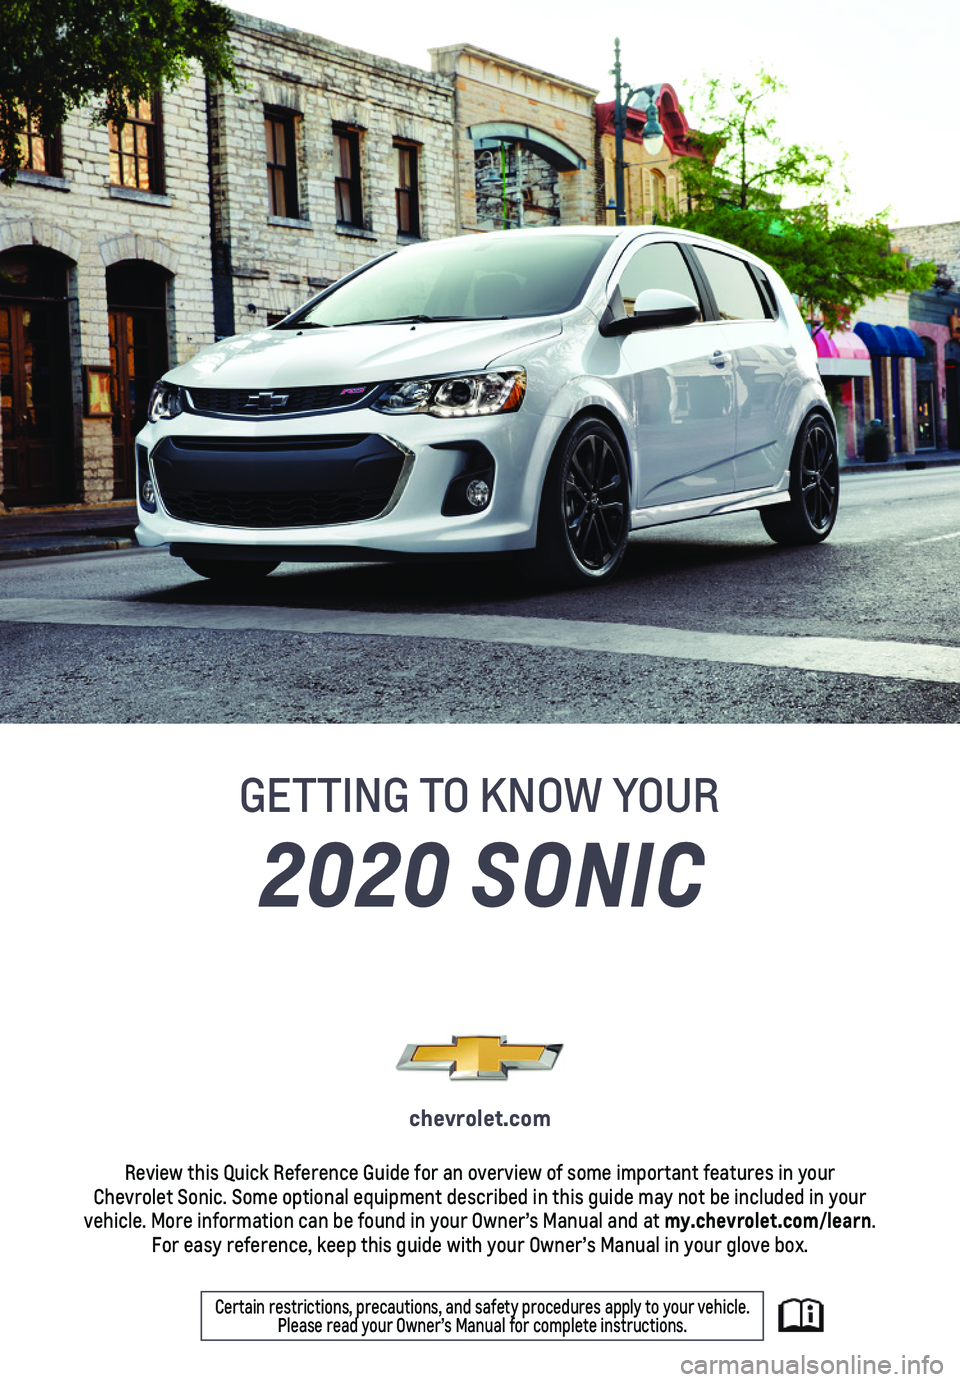 CHEVROLET SONIC 2020  Get To Know Guide 1
2020 SONIC
GETTING TO KNOW YOUR
chevrolet.com
Review this Quick Reference Guide for an overview of some important feat\
ures in your  Chevrolet Sonic. Some optional equipment described in this guide